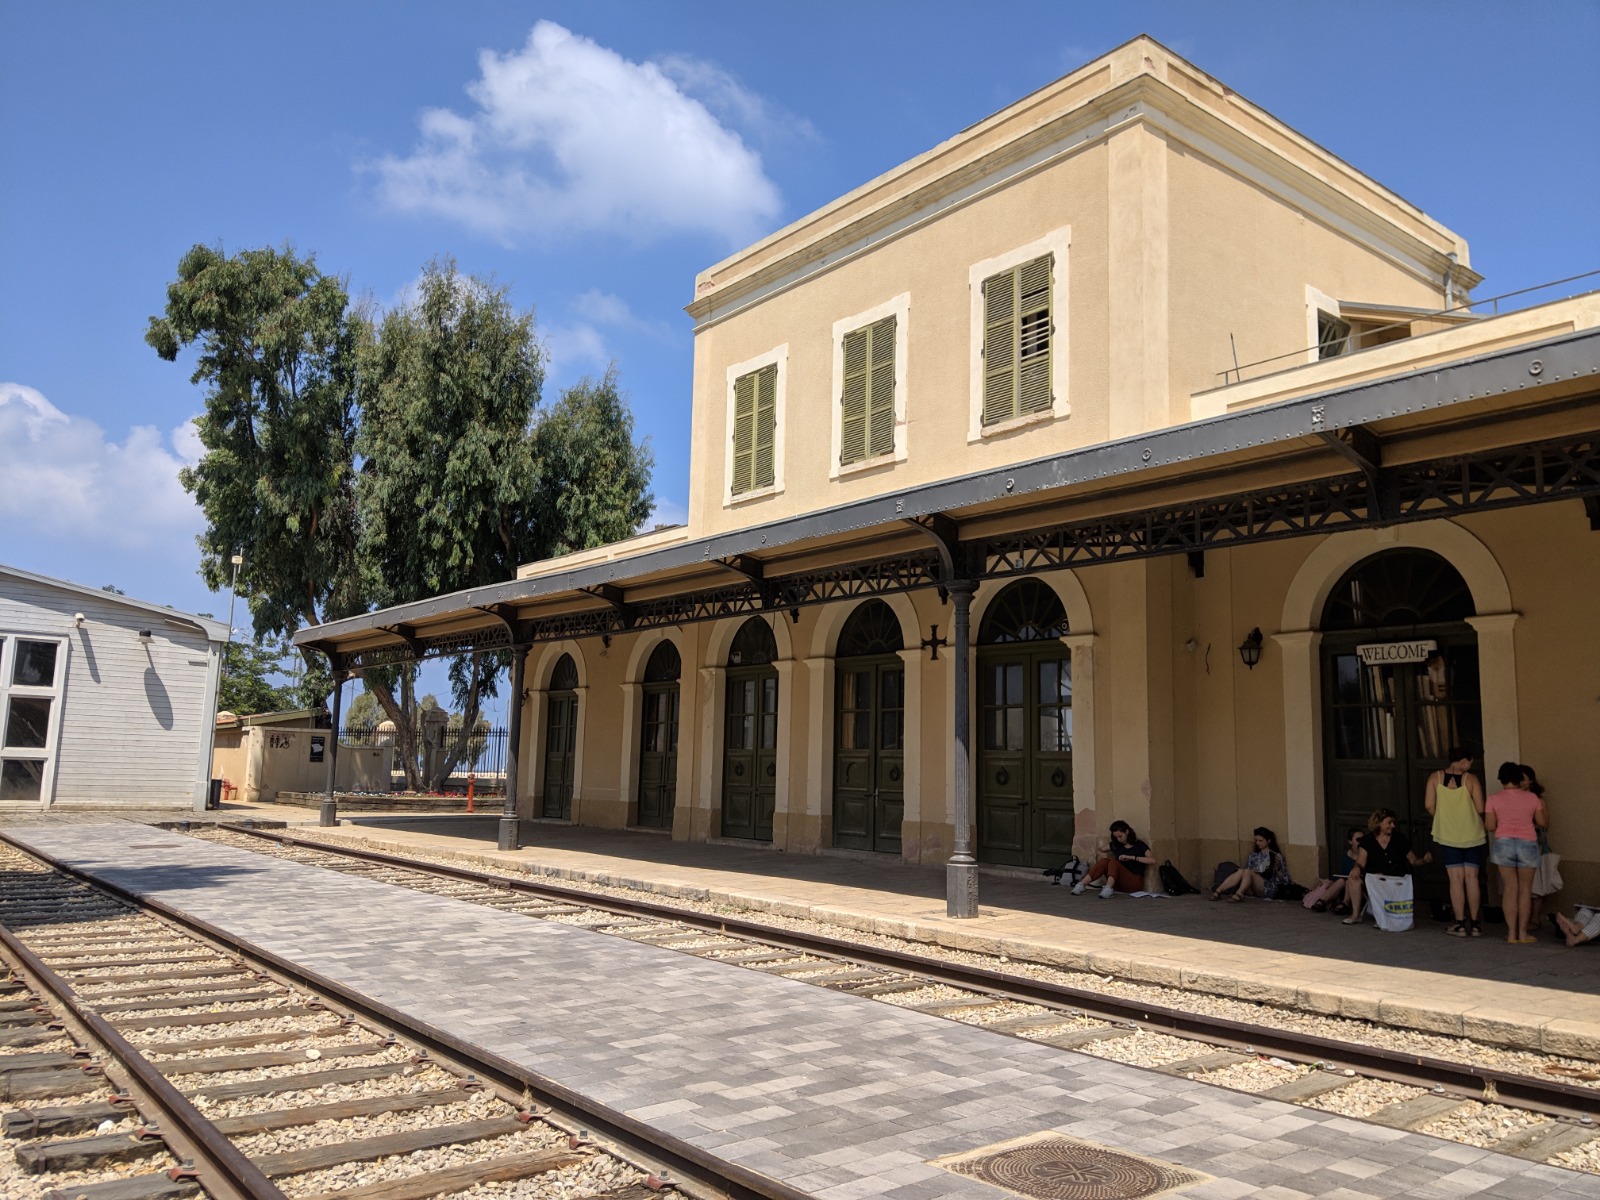 old train station with train